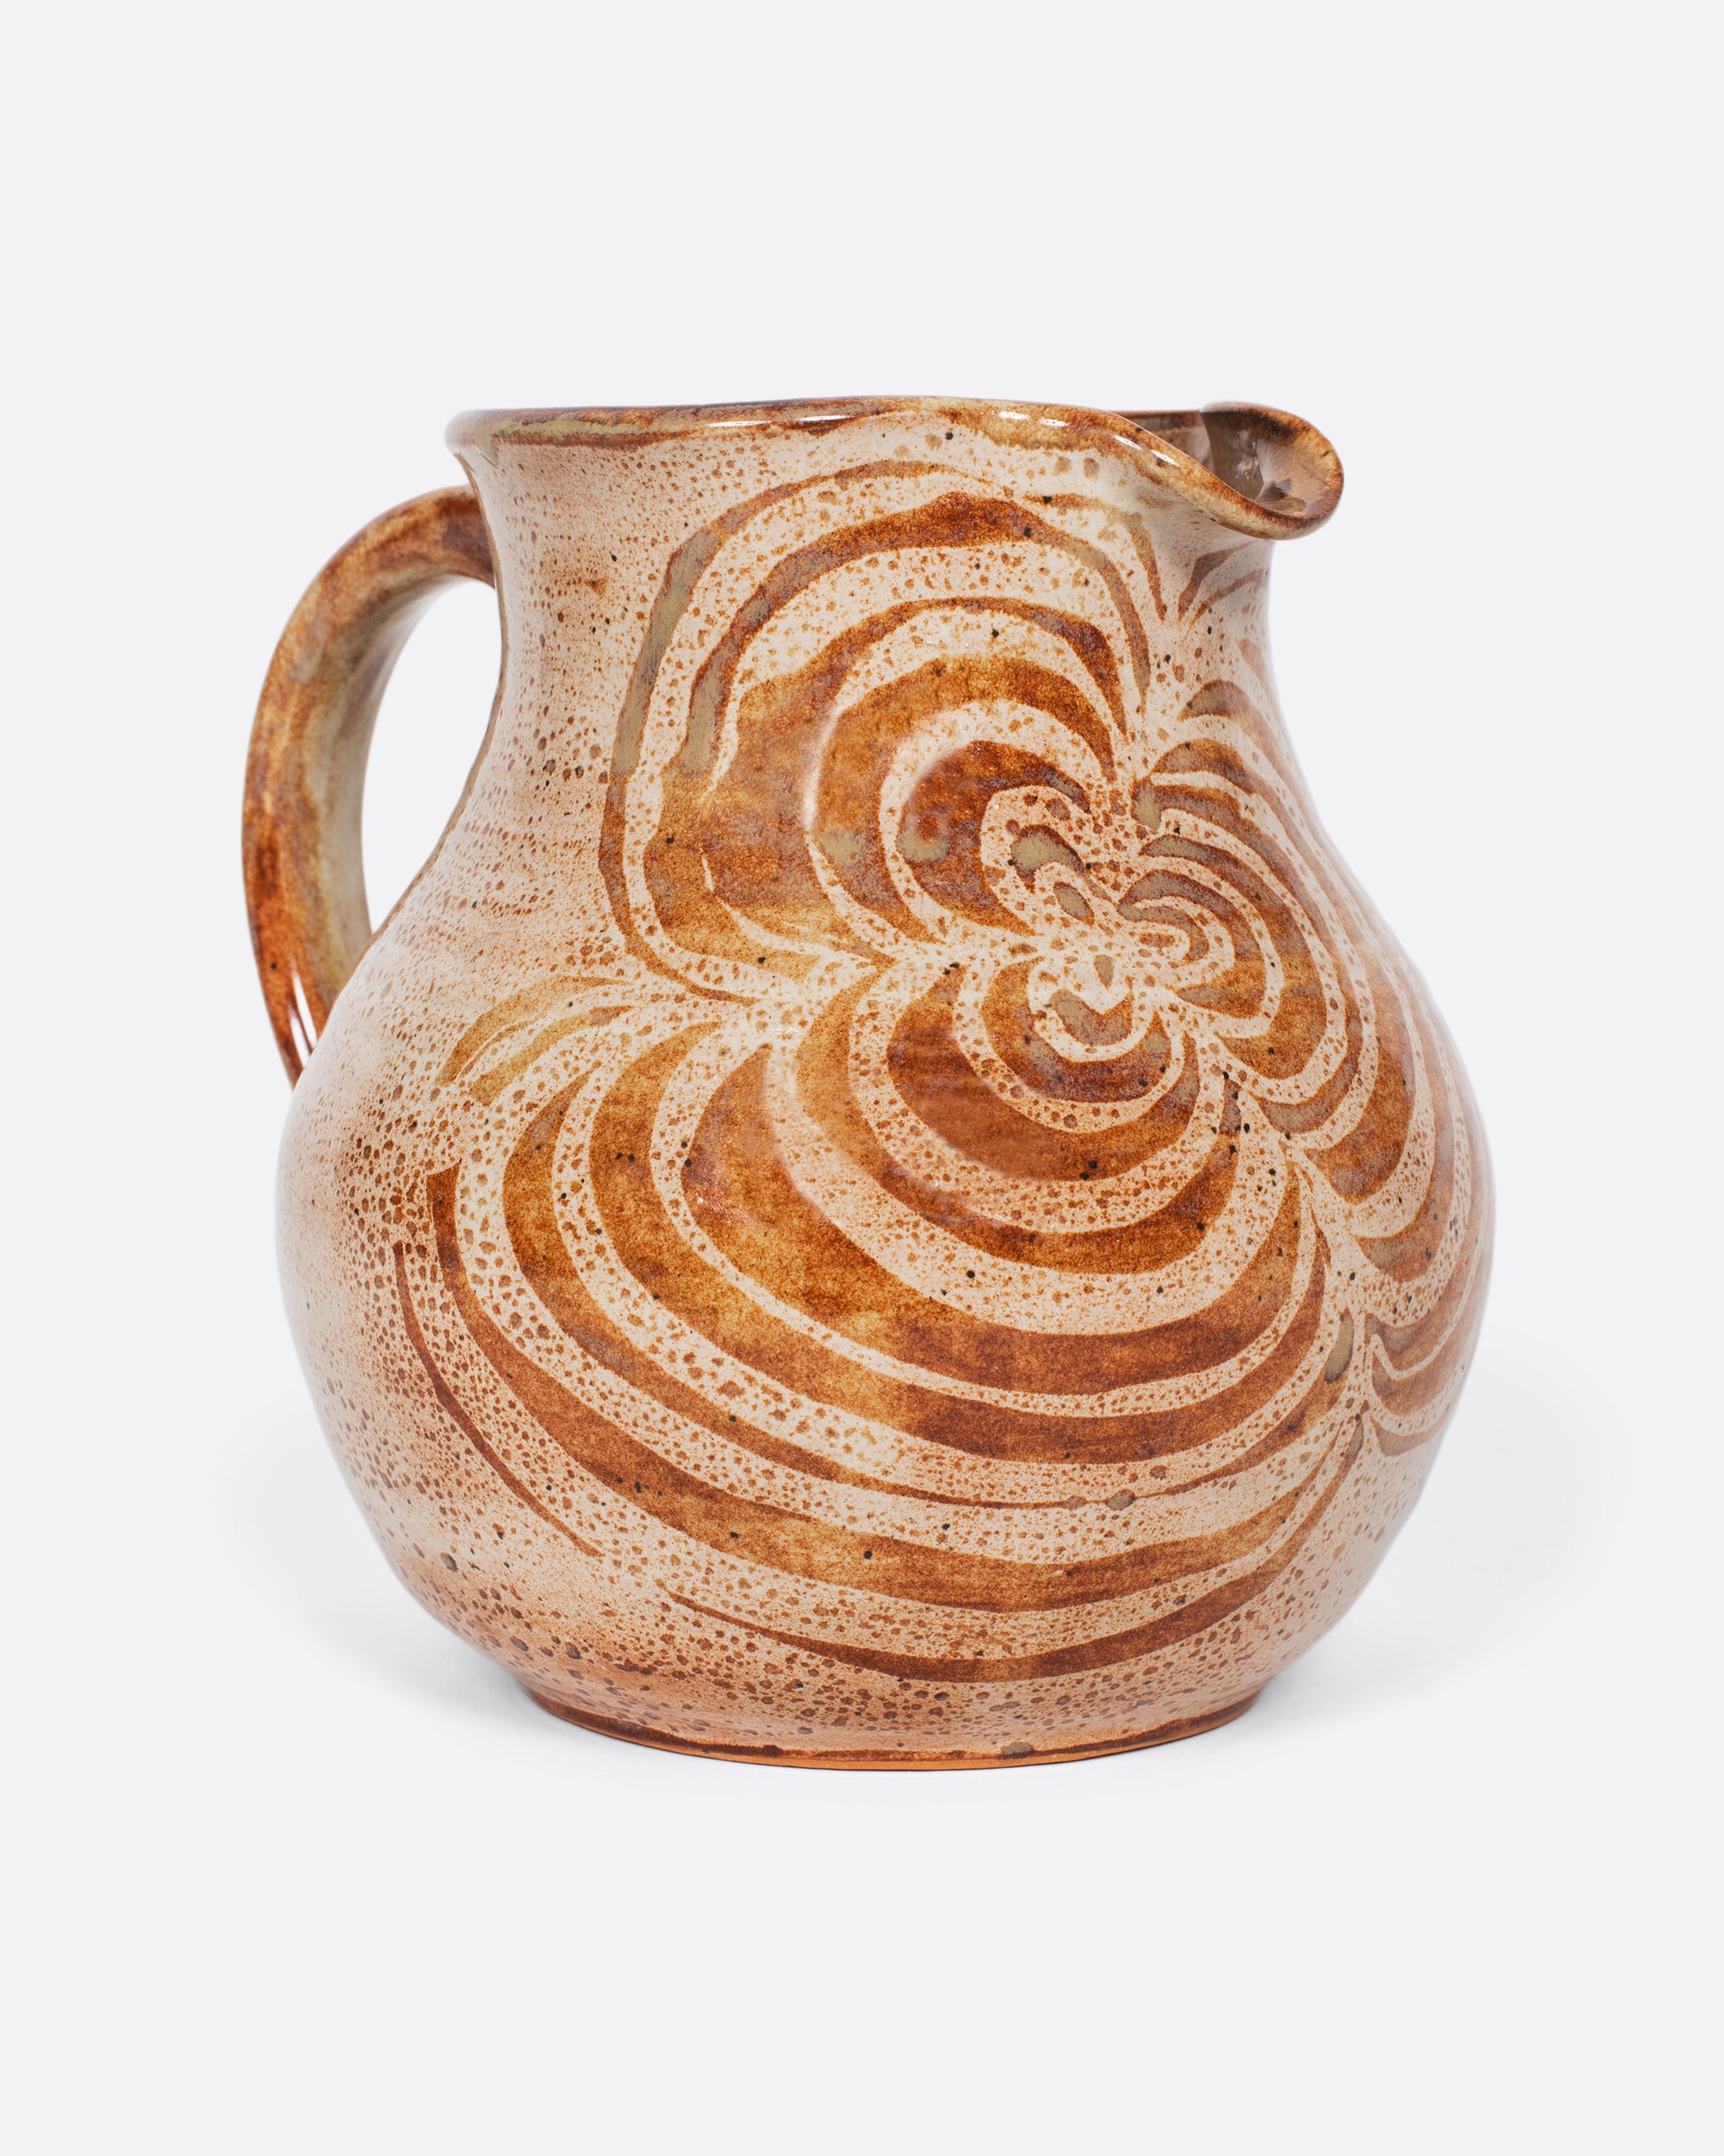 A studio-made, beautifully weighted, rounded ceramic pitcher with a brown swirl design that mimics a blossoming flower.